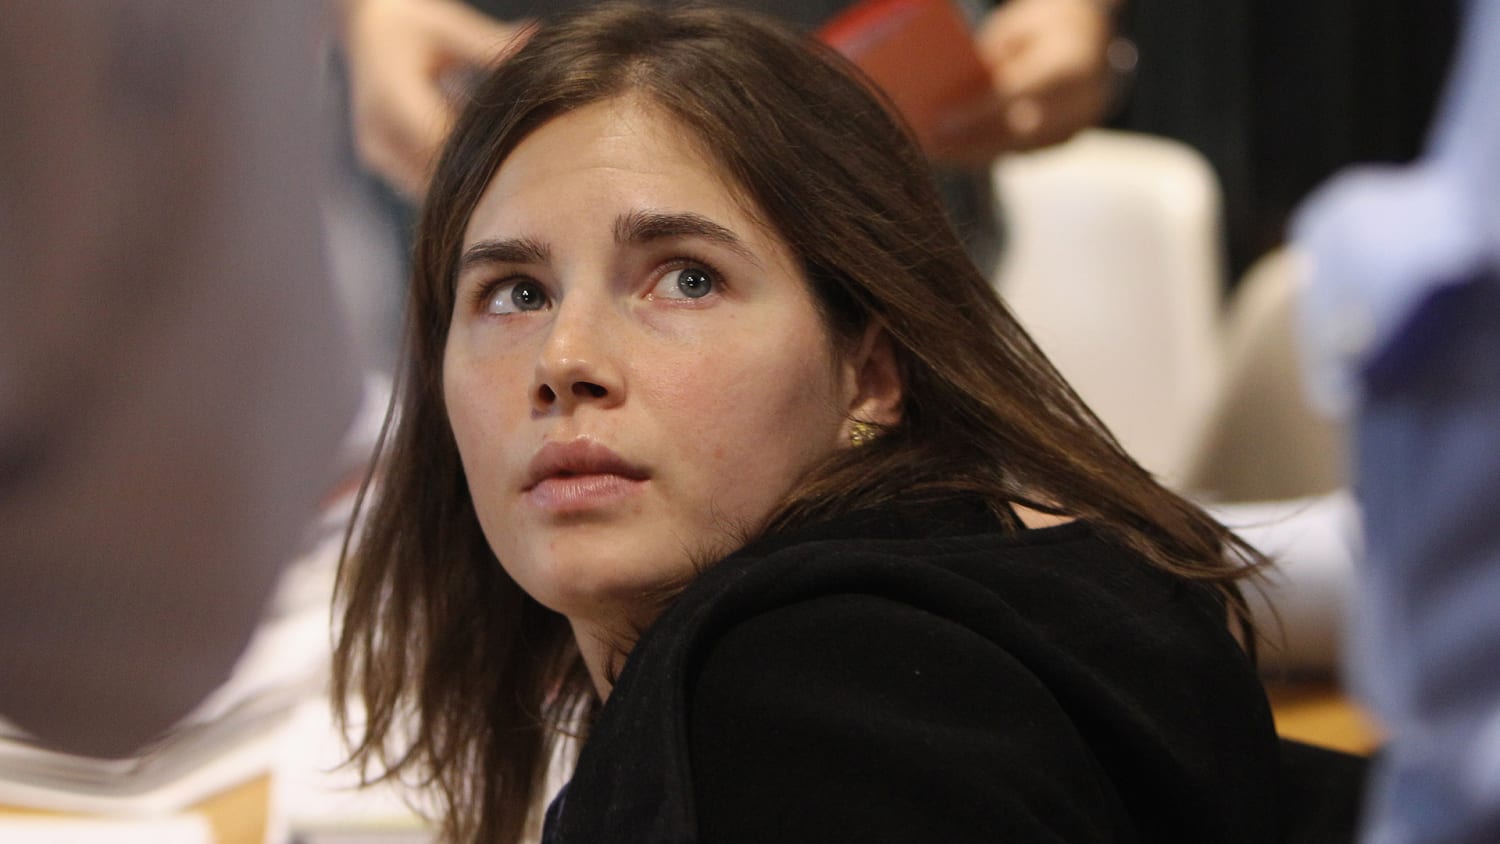 Amanda Knox reveals she considered suicide while in prison - TODAY.com1920 x 1080